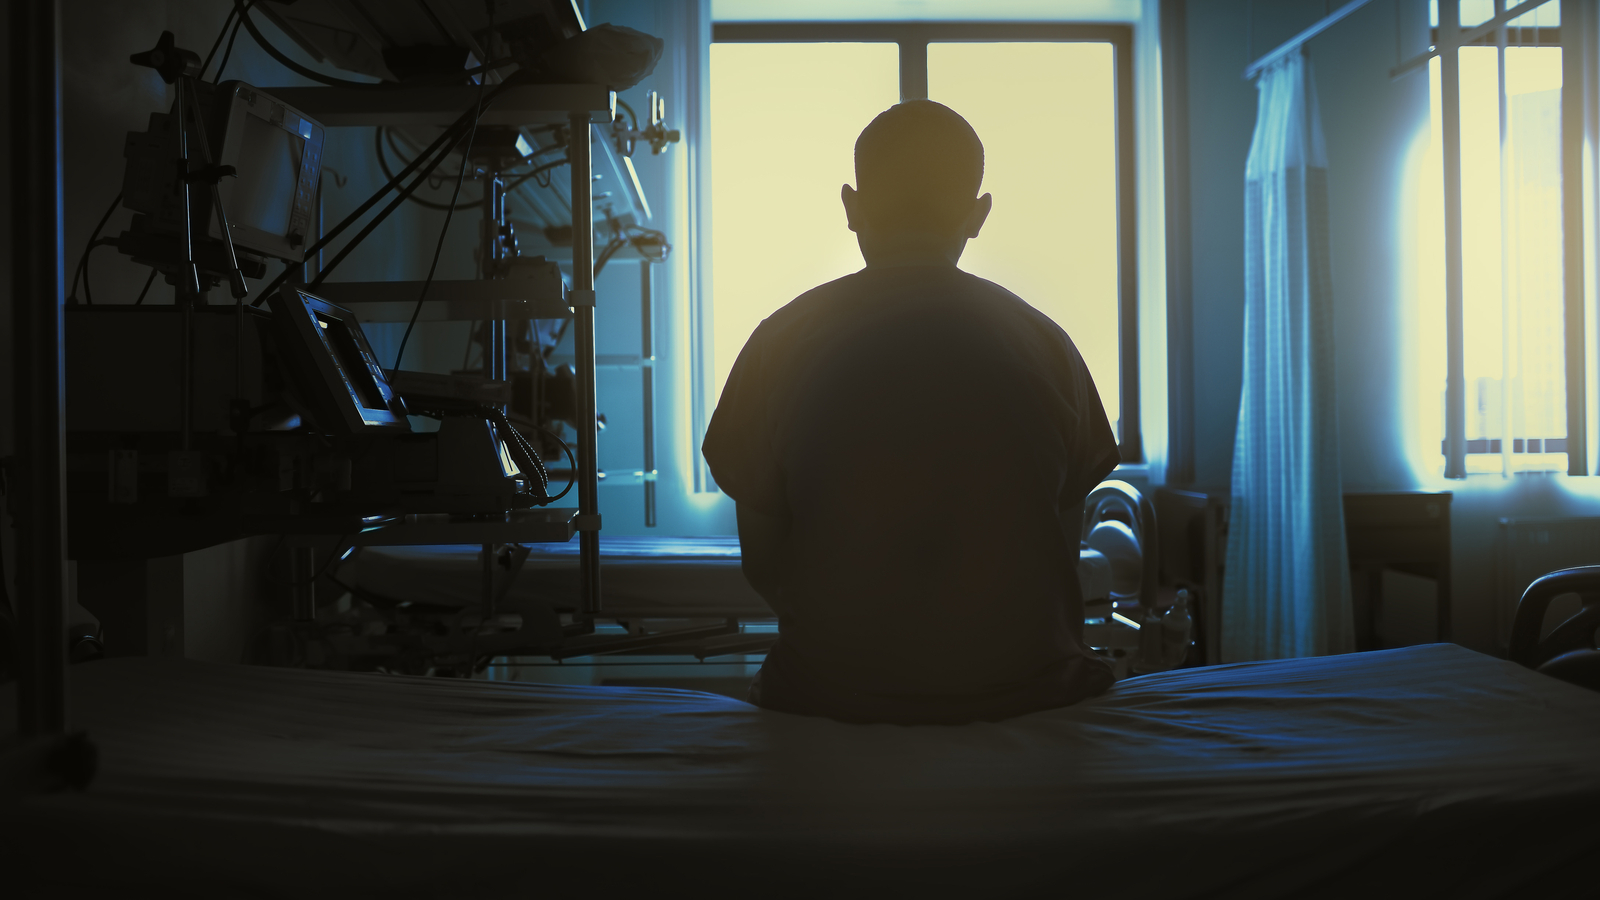 A person in silhouette faces toward a bright window while sitting at the edge of a hospital bed.